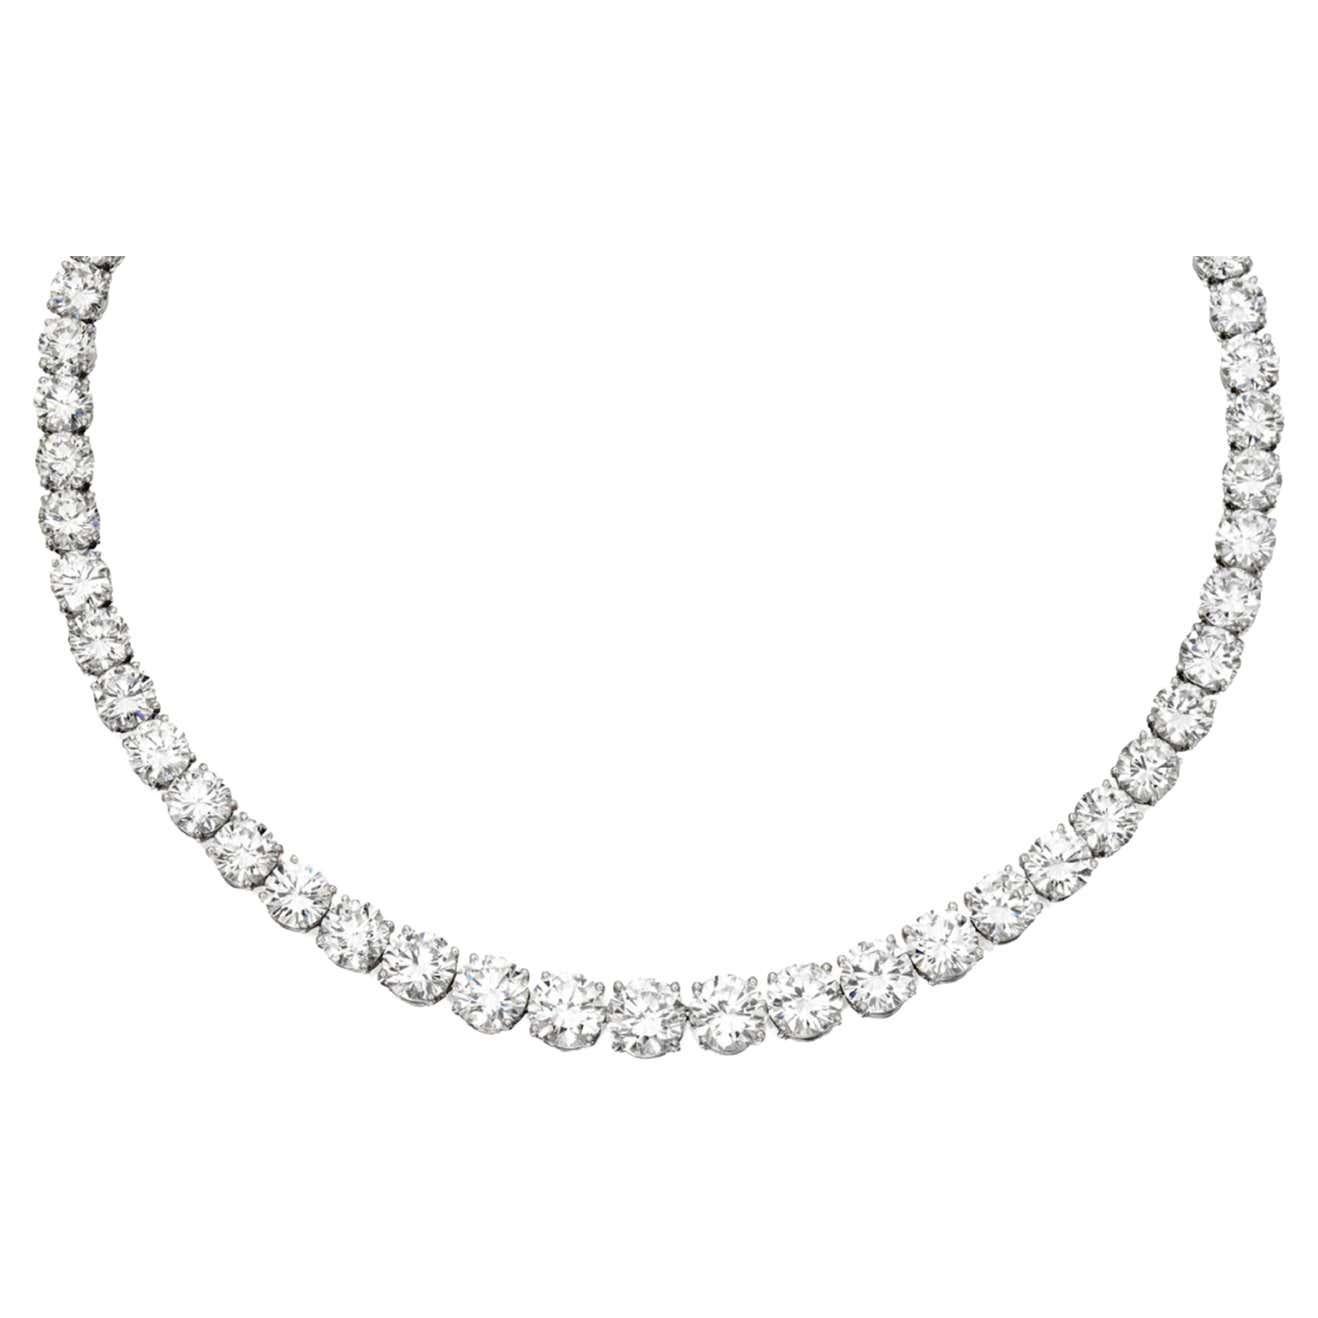 Discover unparalleled sophistication with our 16.25-inch Tennis necklace, meticulously crafted in luxurious 18K white gold. Embrace the allure of 80 round diamonds, totaling an impressive 40.01 carats, elegantly showcased in a basket prong setting.